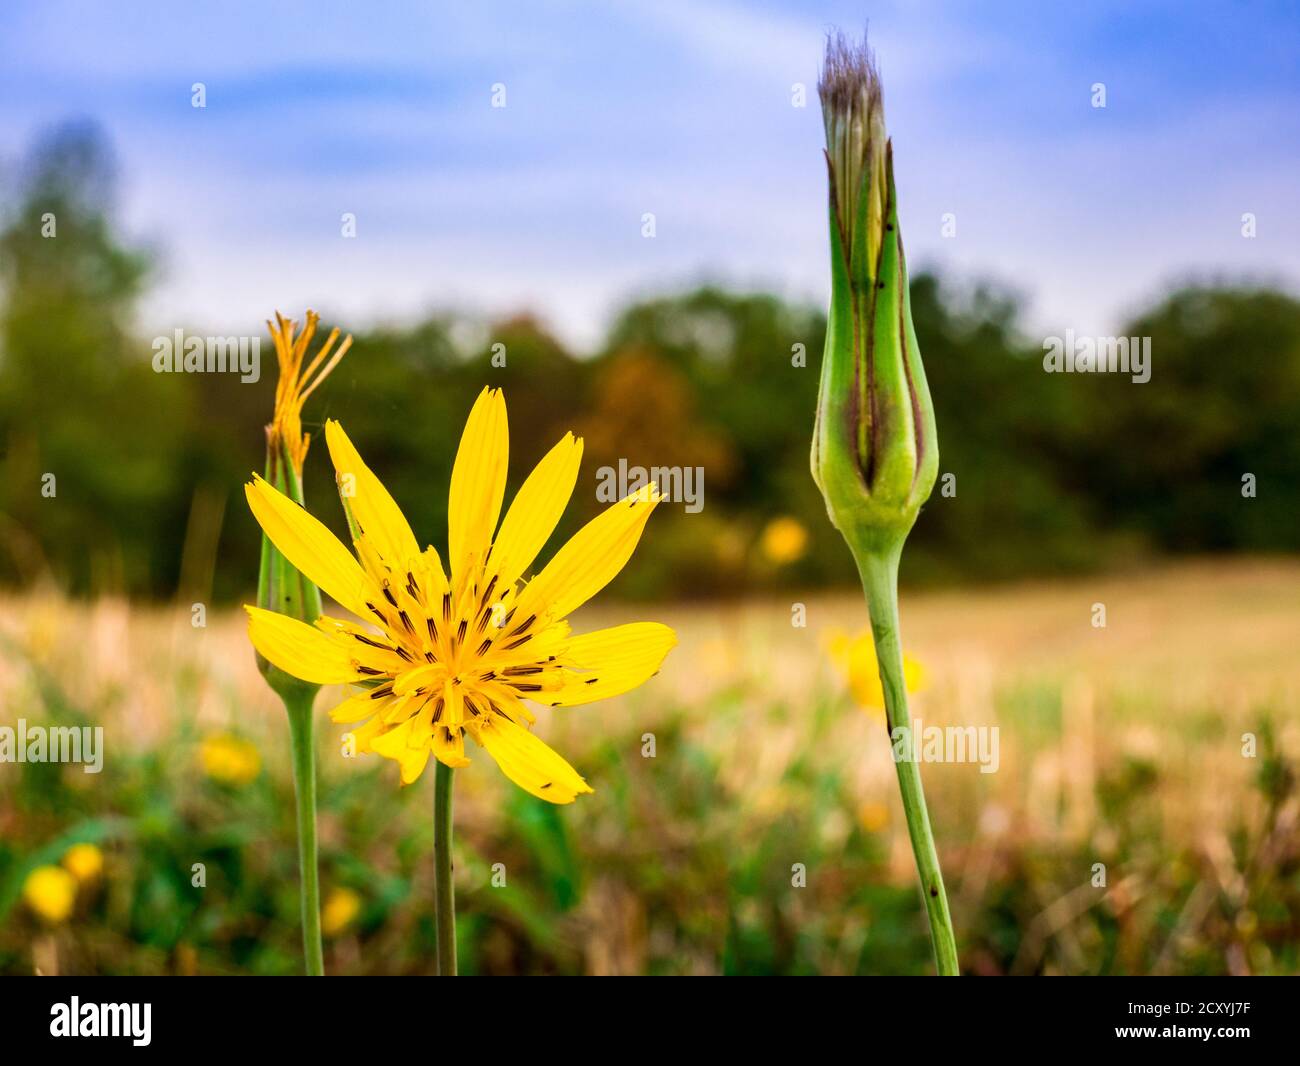 Meadow Salsify flower(Tragopogon pratensis L.) - also known as meadow goat's-beard. Close-up view of flower with blurred meadow, blue cloudy sky and Stock Photo